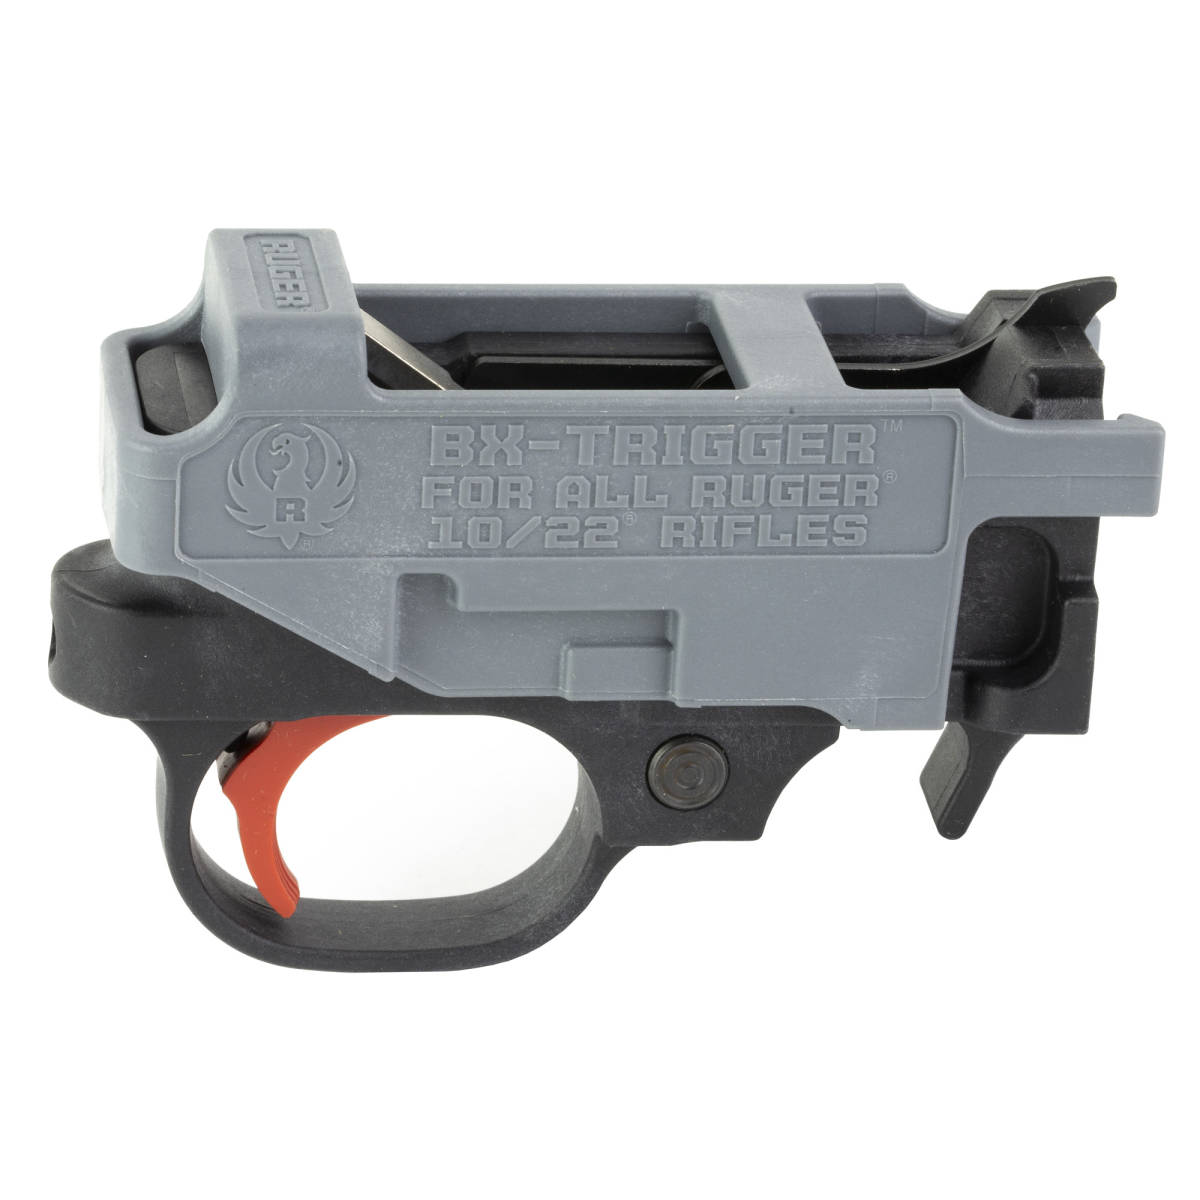 Ruger 90631 BX Trigger 10/22/22 Charger 2.75 lbs. Draw Weight, Red-img-1